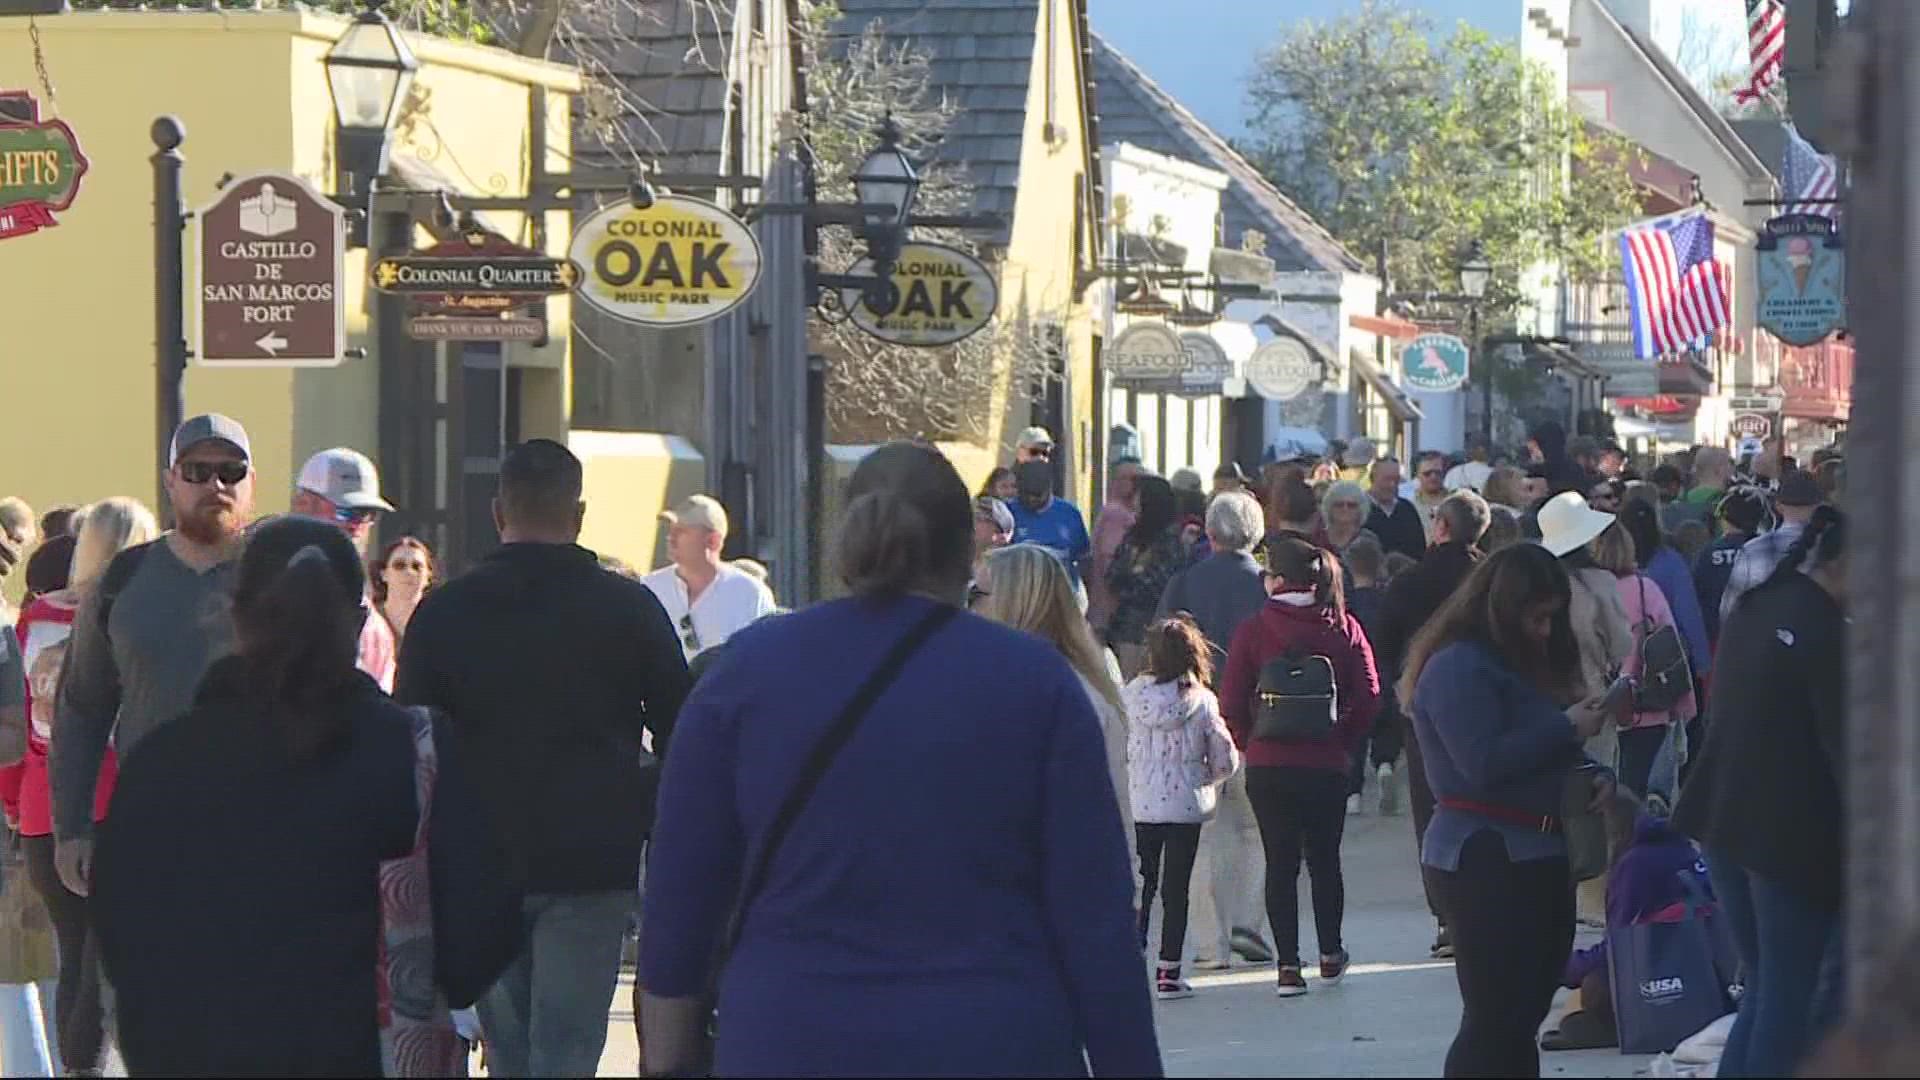 People are willing to cram into trams, parking lots, and pathways for a taste of St. Augustine at the holidays.